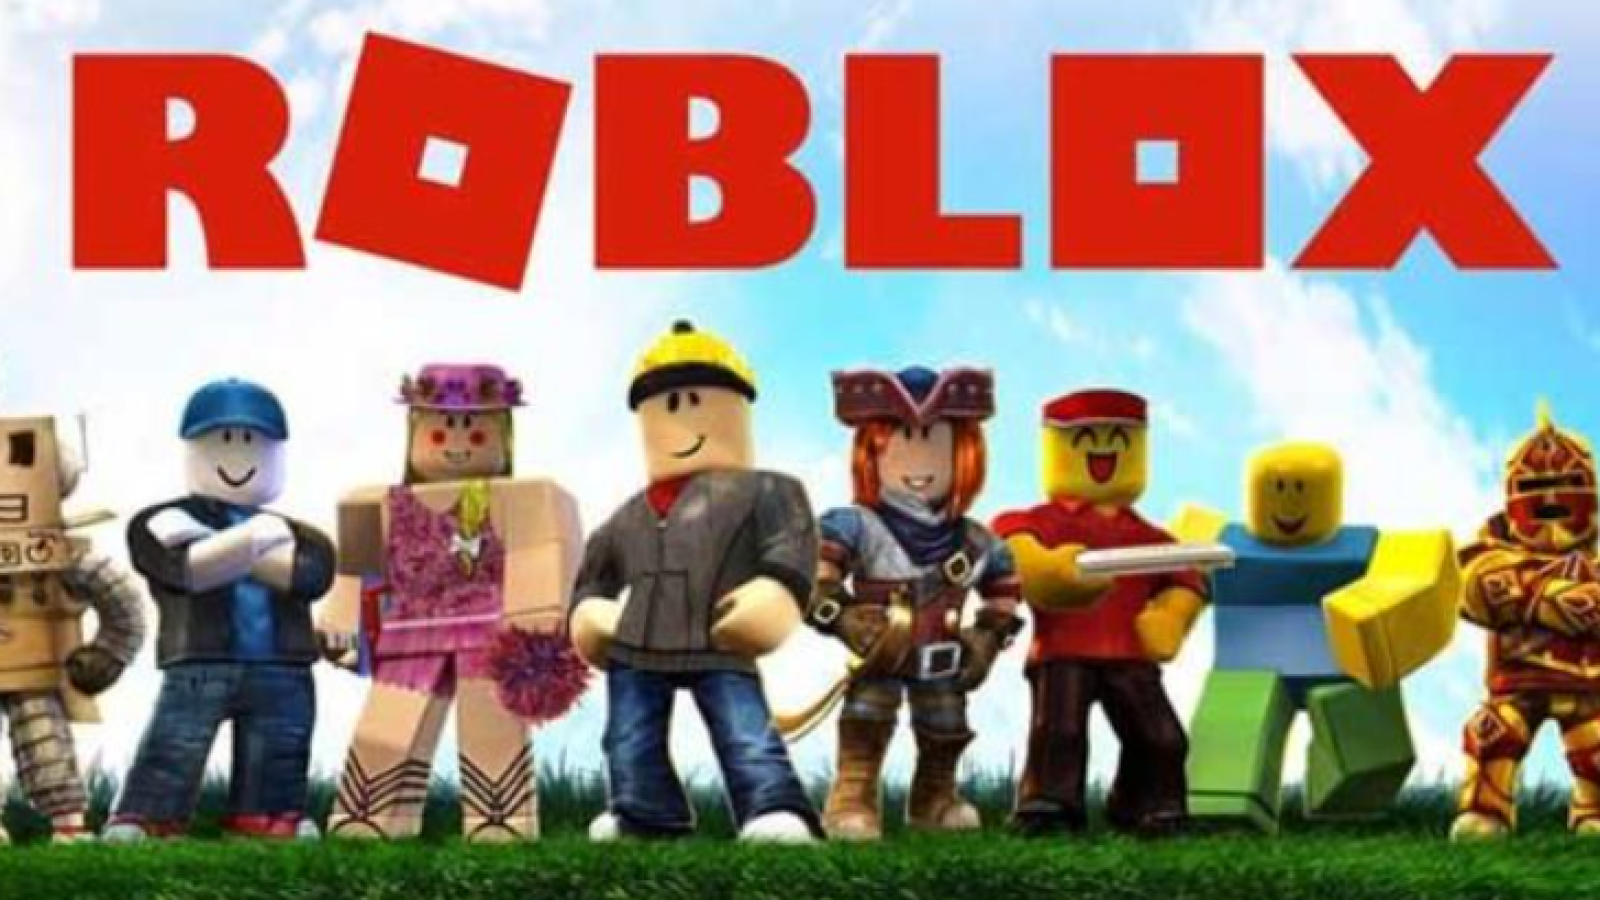 Roblox Hidden X-Rated Content Include Nude Avatars Simulating Sex